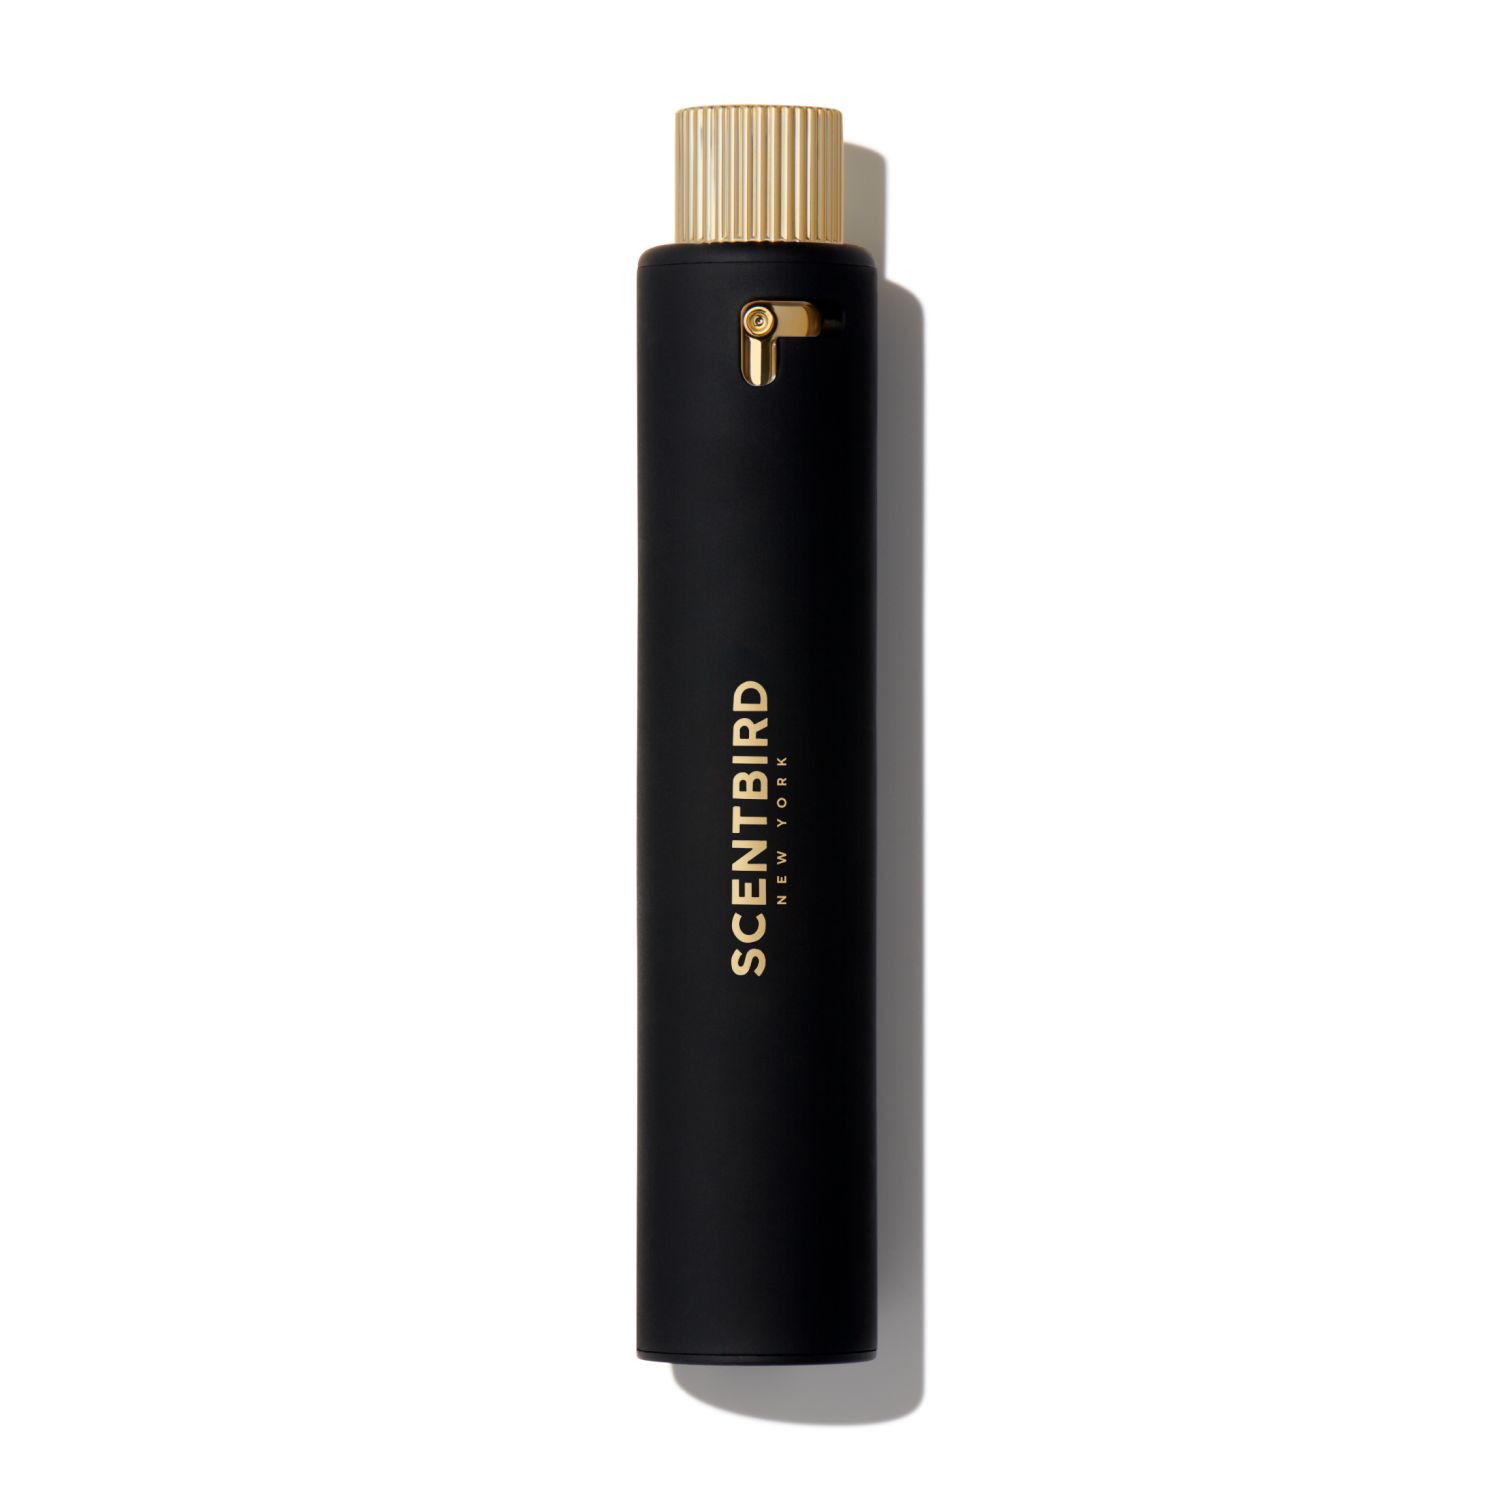 Get Parfums de Marly Delina at Scentbird for $16.95